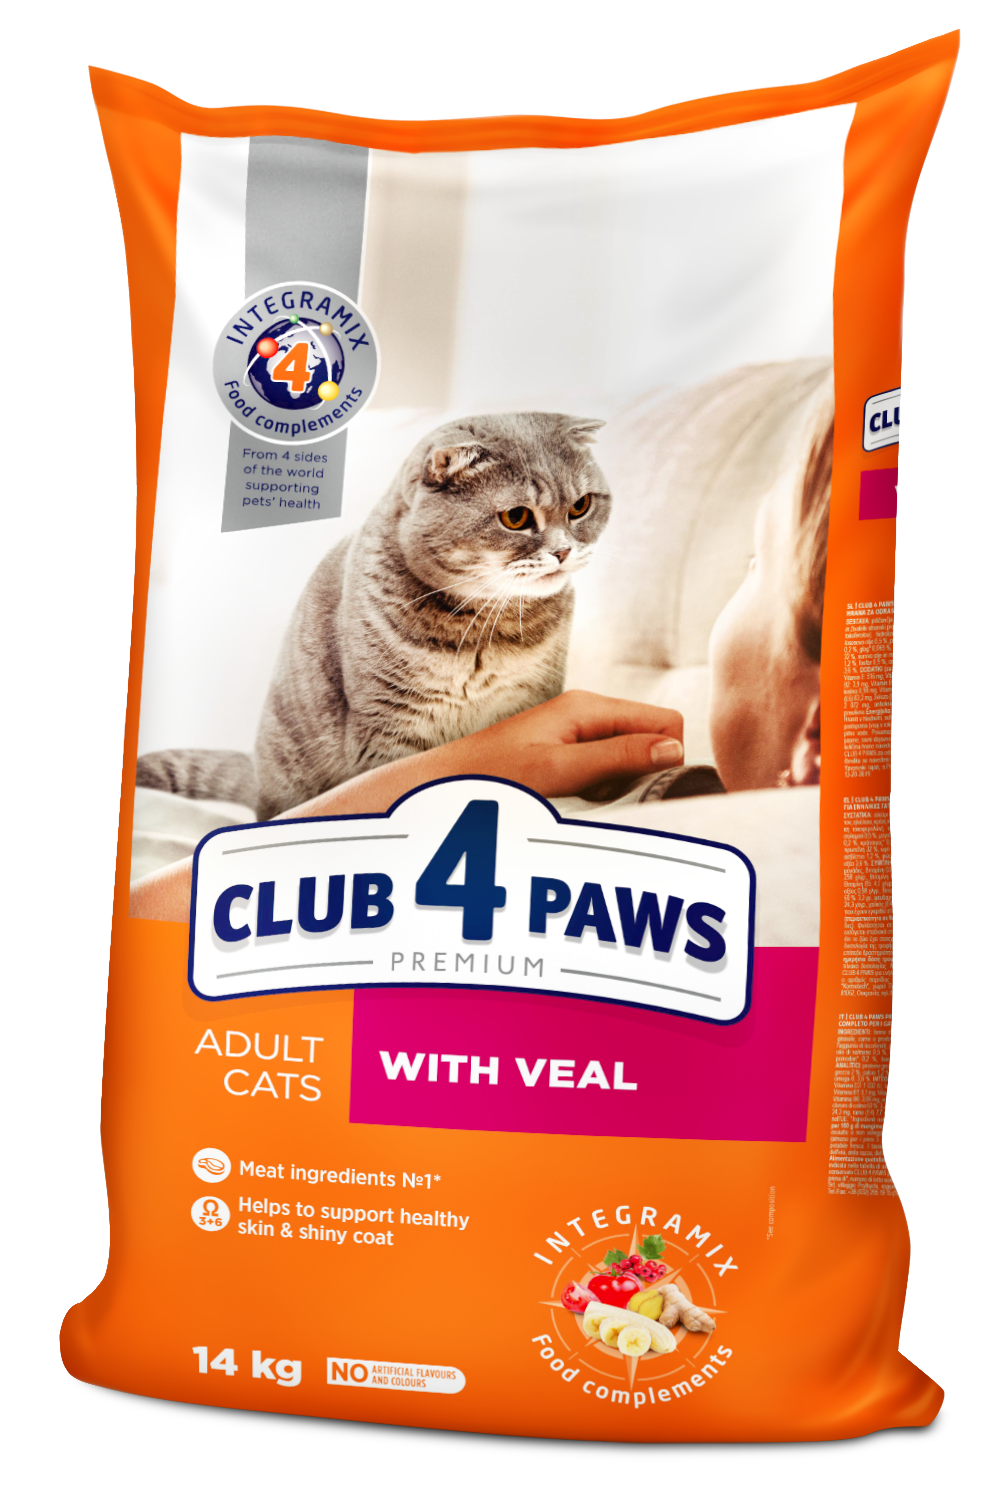 CLUB 4 PAWS Premium with Veal. Complete Dry Food for Adult Cats